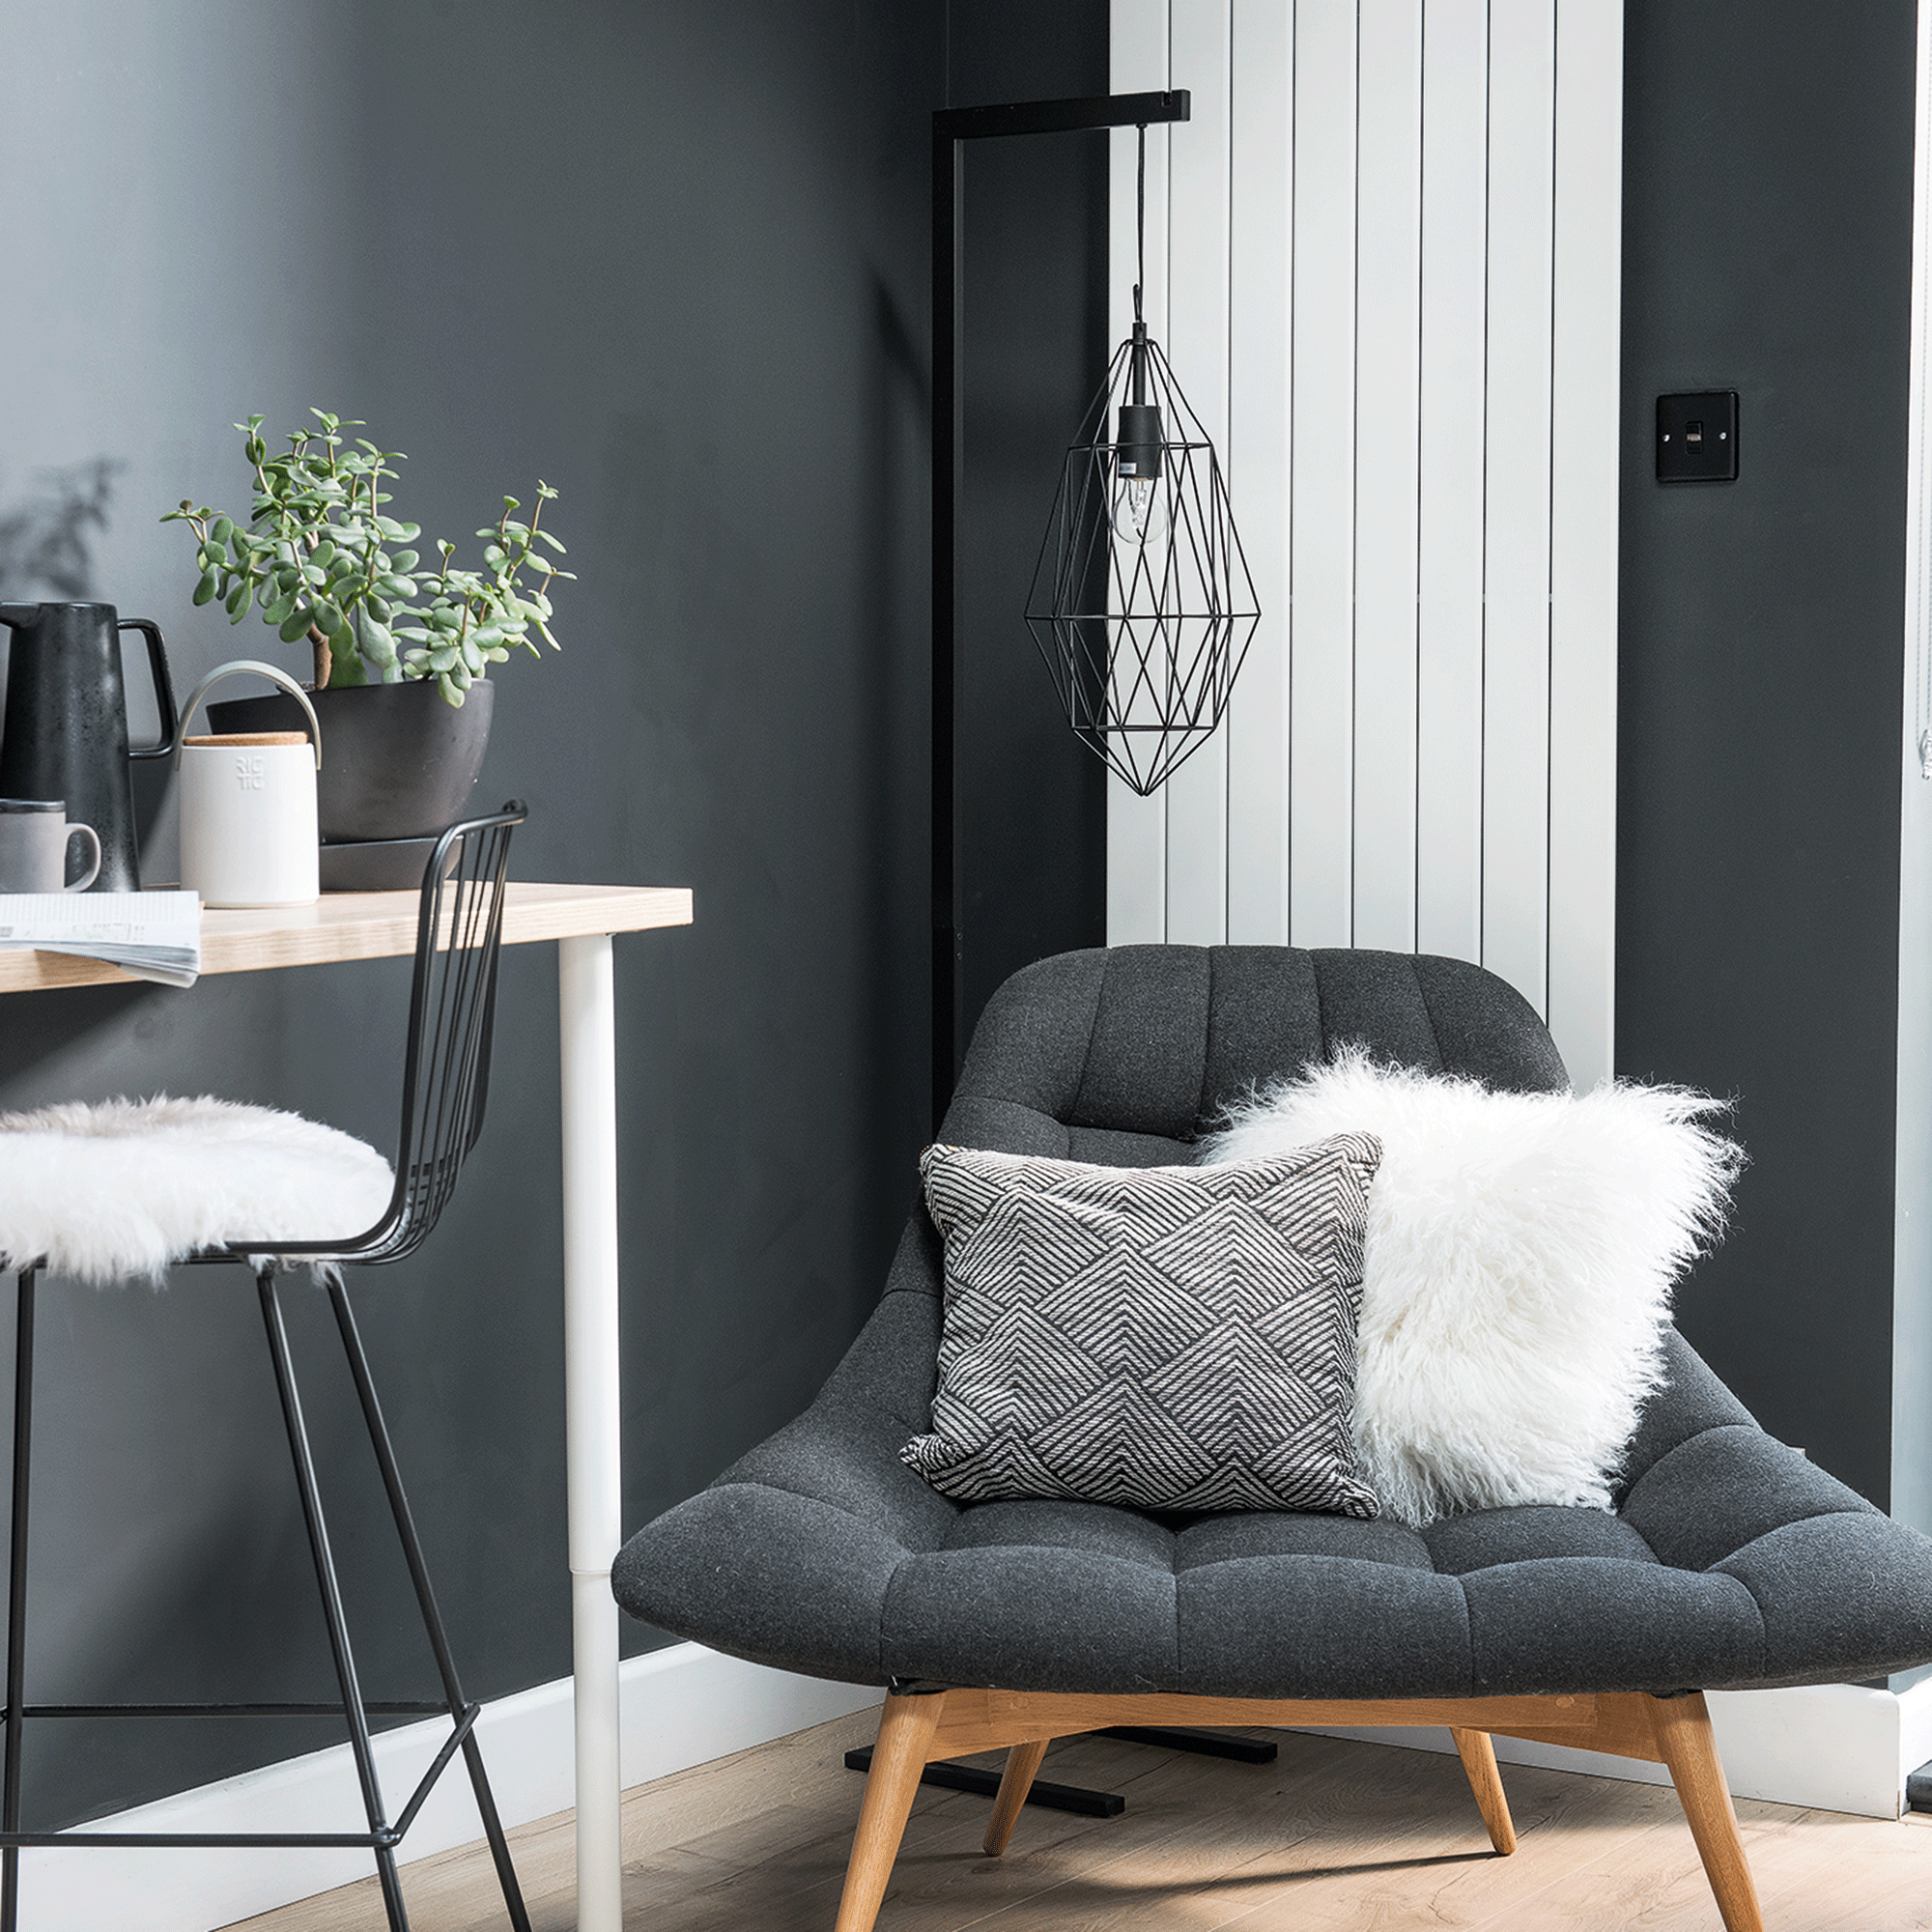 Grey chair in grey room with white radiator